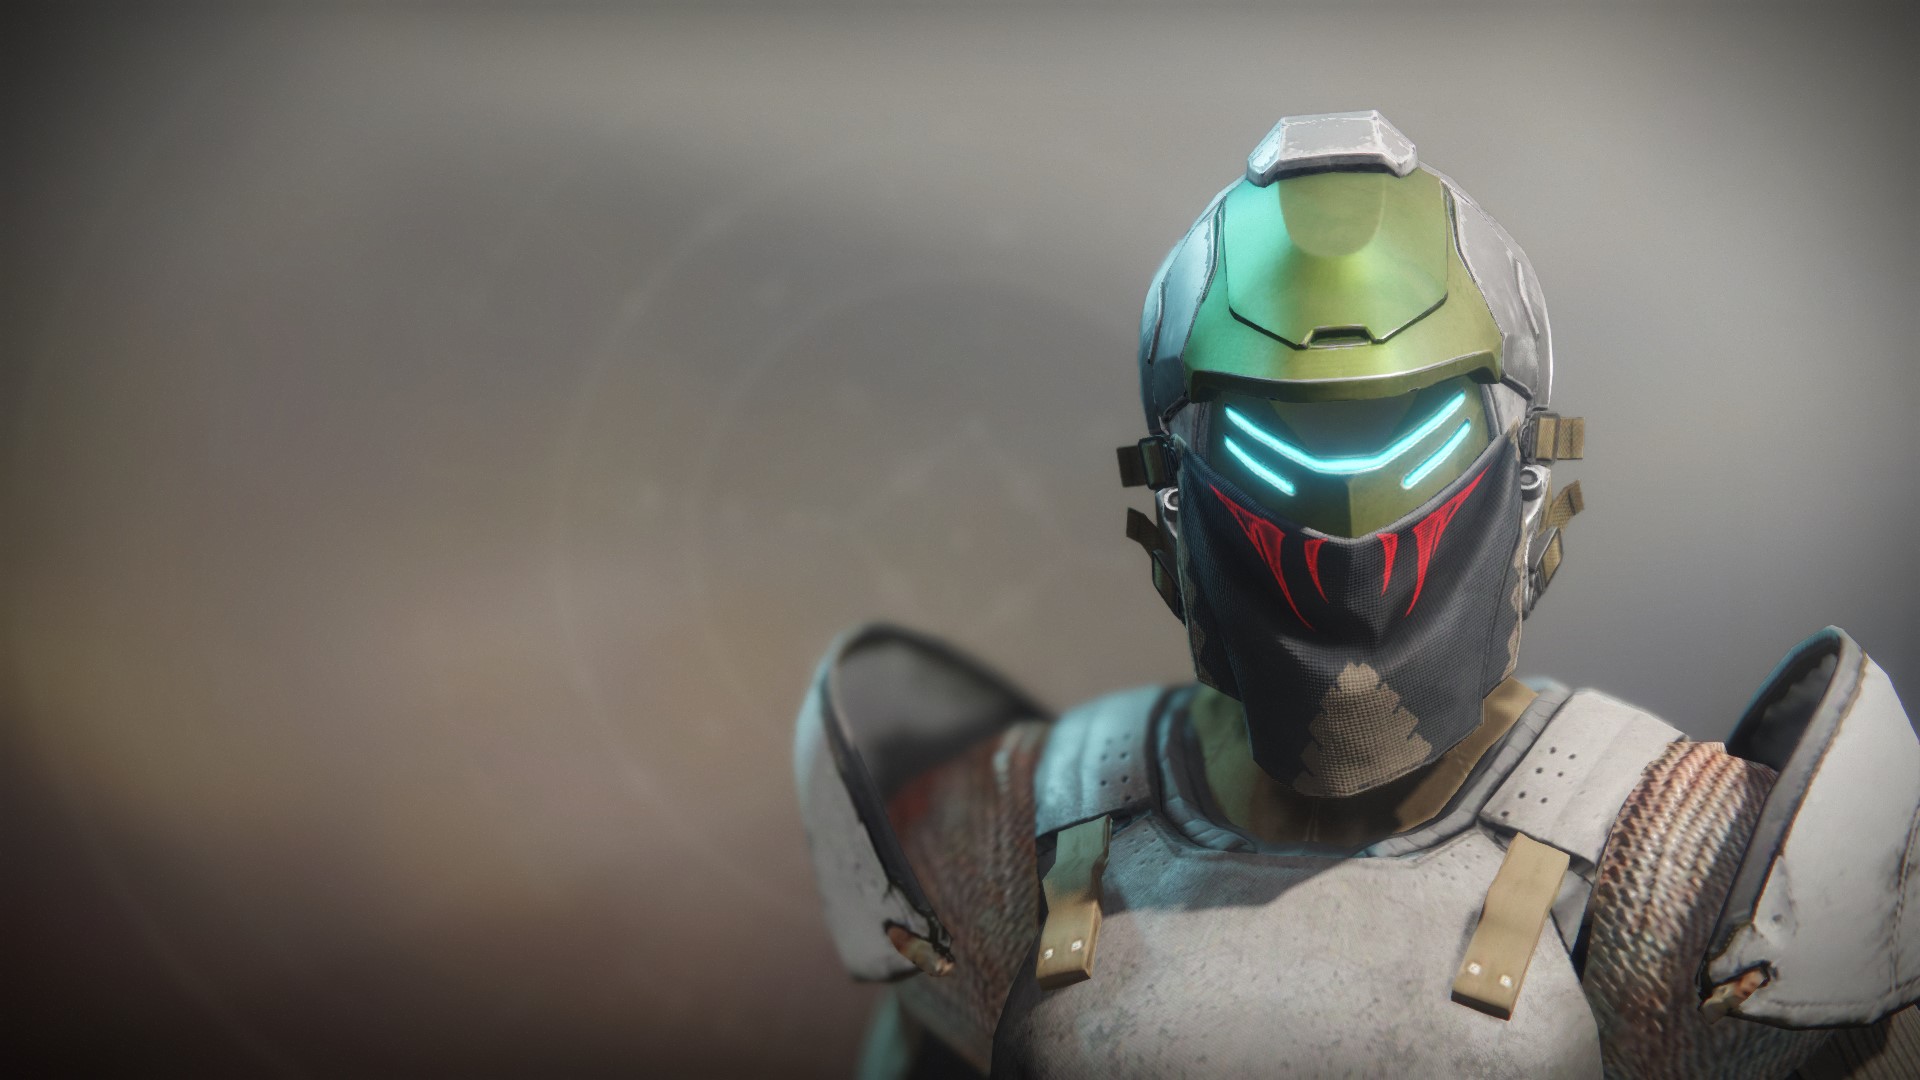 An in-game render of the Notorious Invader Helm.